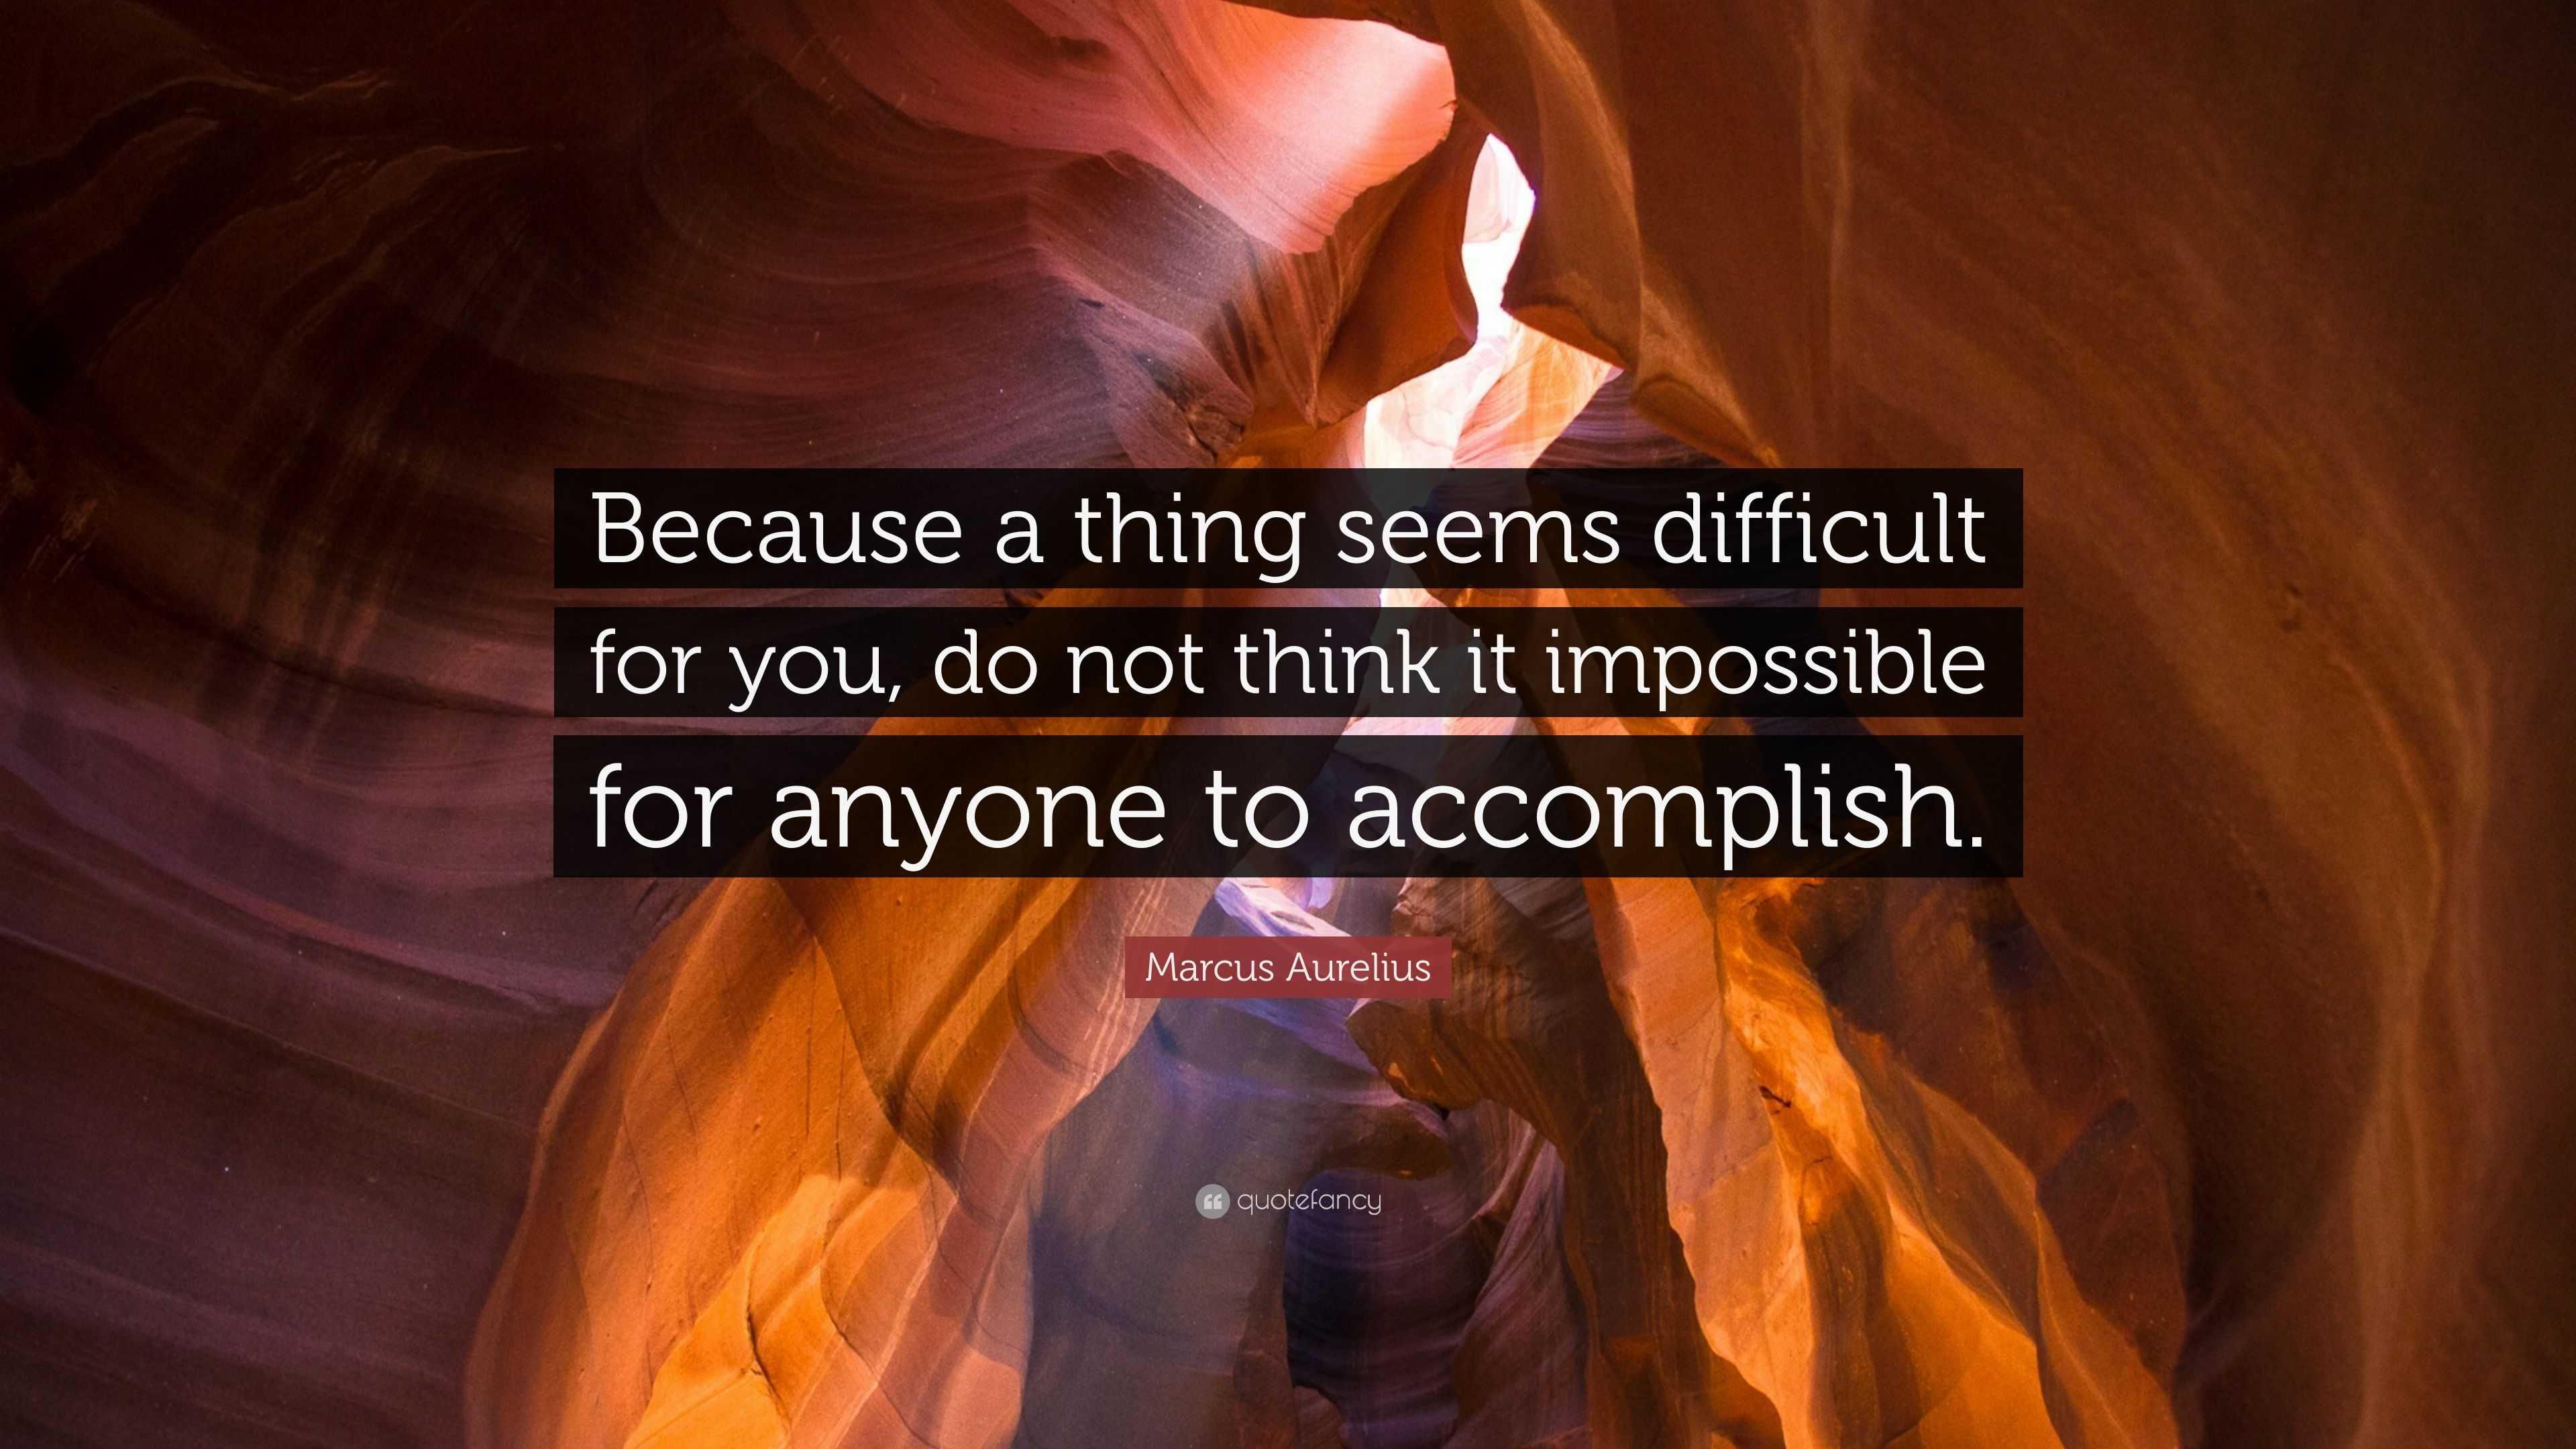 Marcus Aurelius Quote: “Because a thing seems difficult for you, do not ...